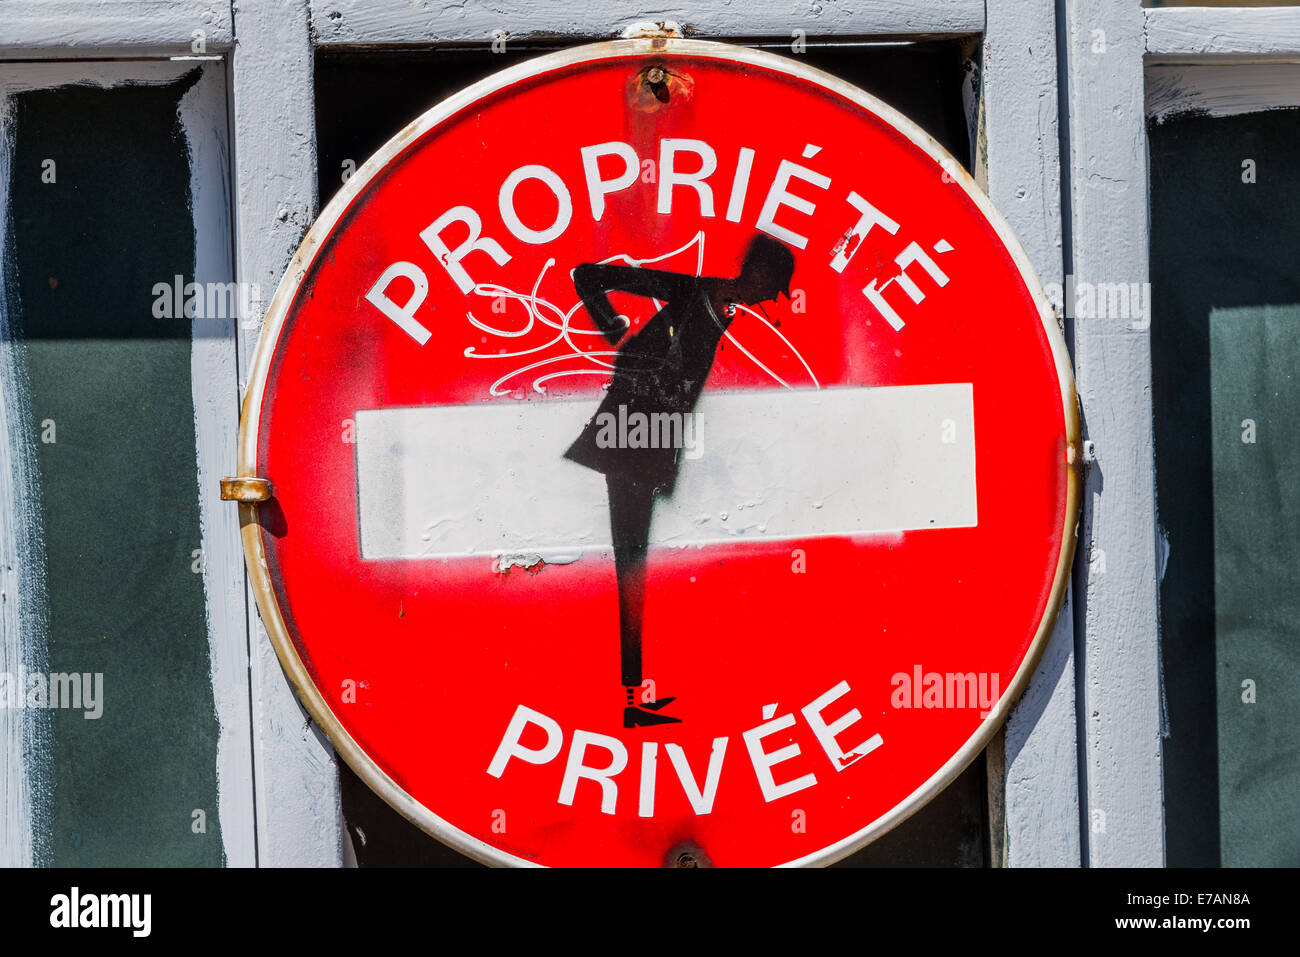 A propriete priveeprivate property sign with a black painted figure. Stock Photo